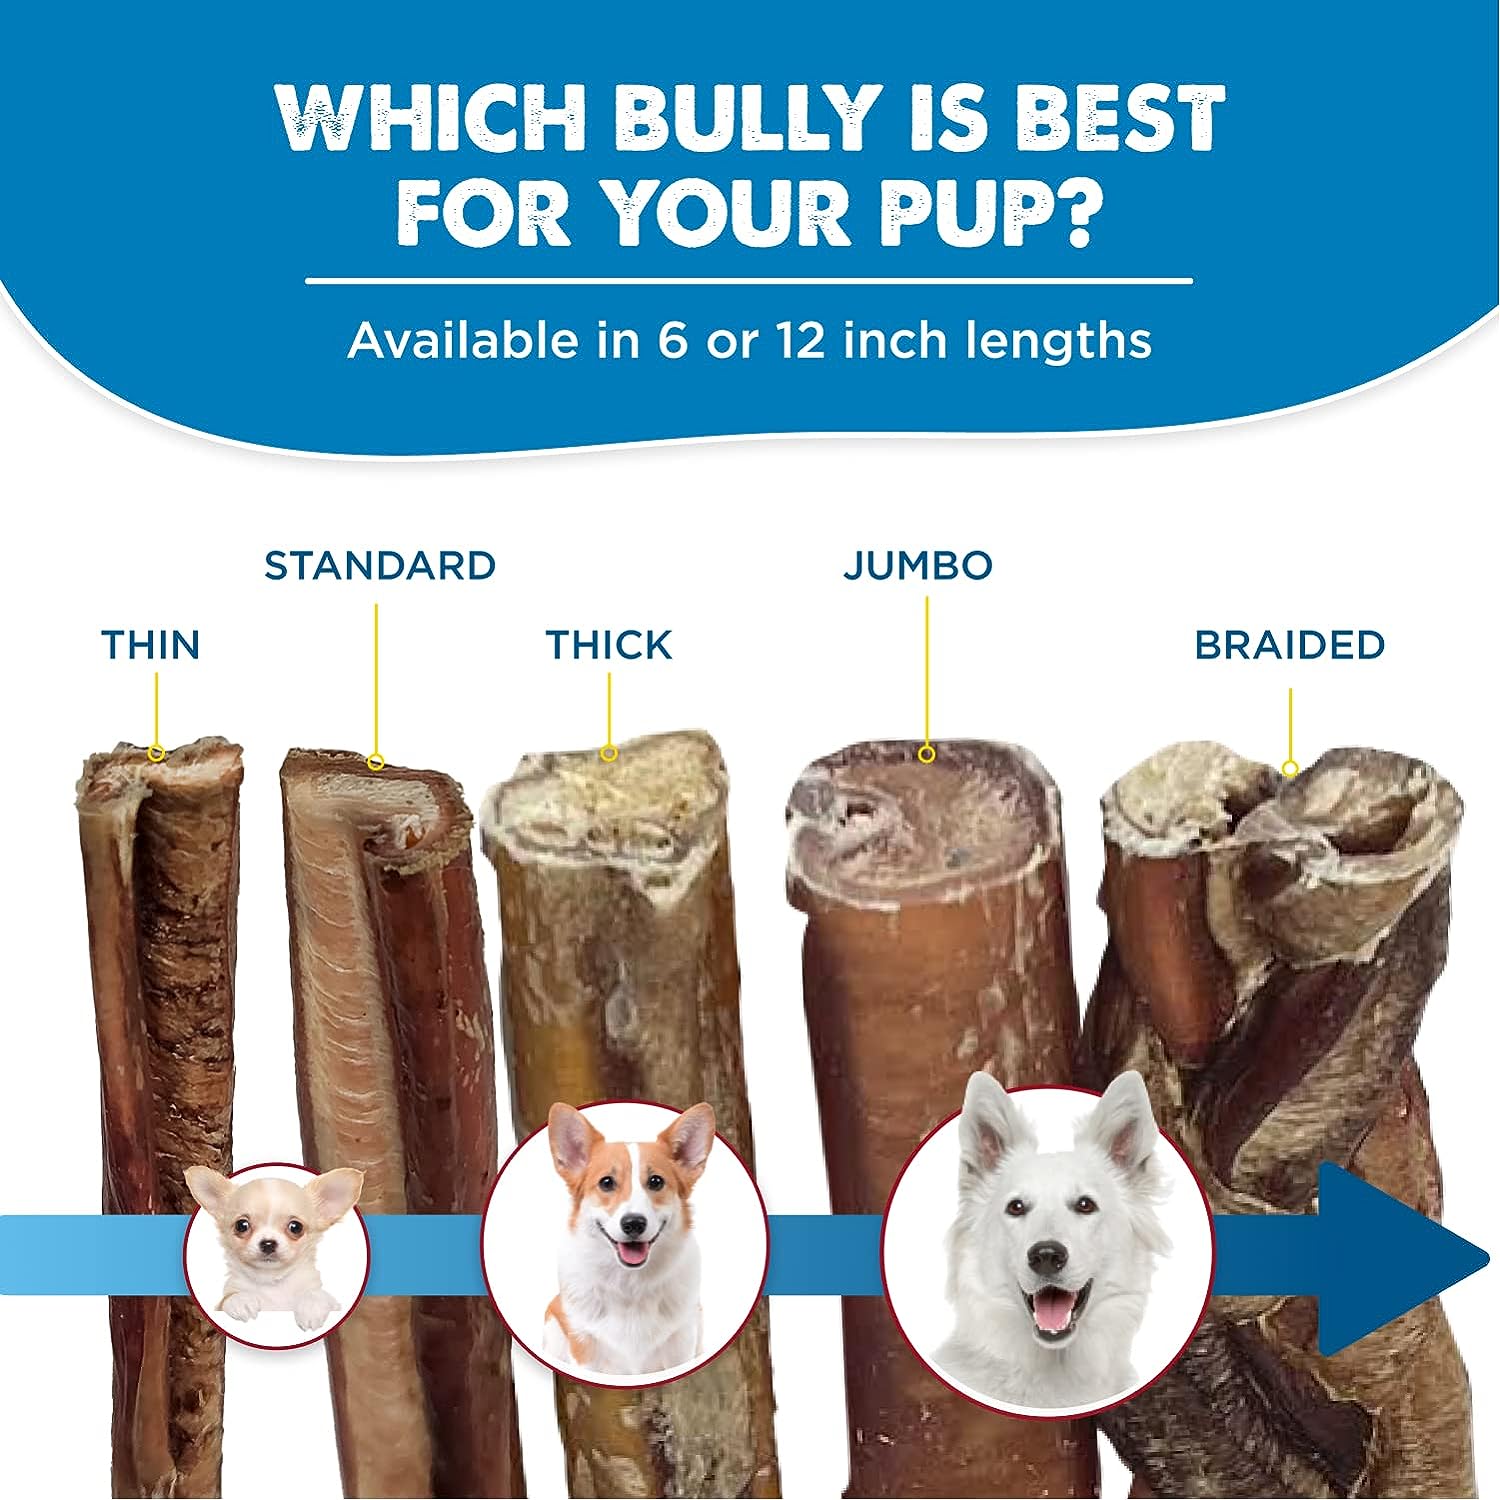 Best Bully Sticks All Natural Premium 12 Inch Jumbo Bully Sticks for Large Dogs - USA Baked & Packed - 100% Grass-Fed Beef - Single-Ingredient Grain & Rawhide Free Dog Chews - 25 Pack : Pet Supplies